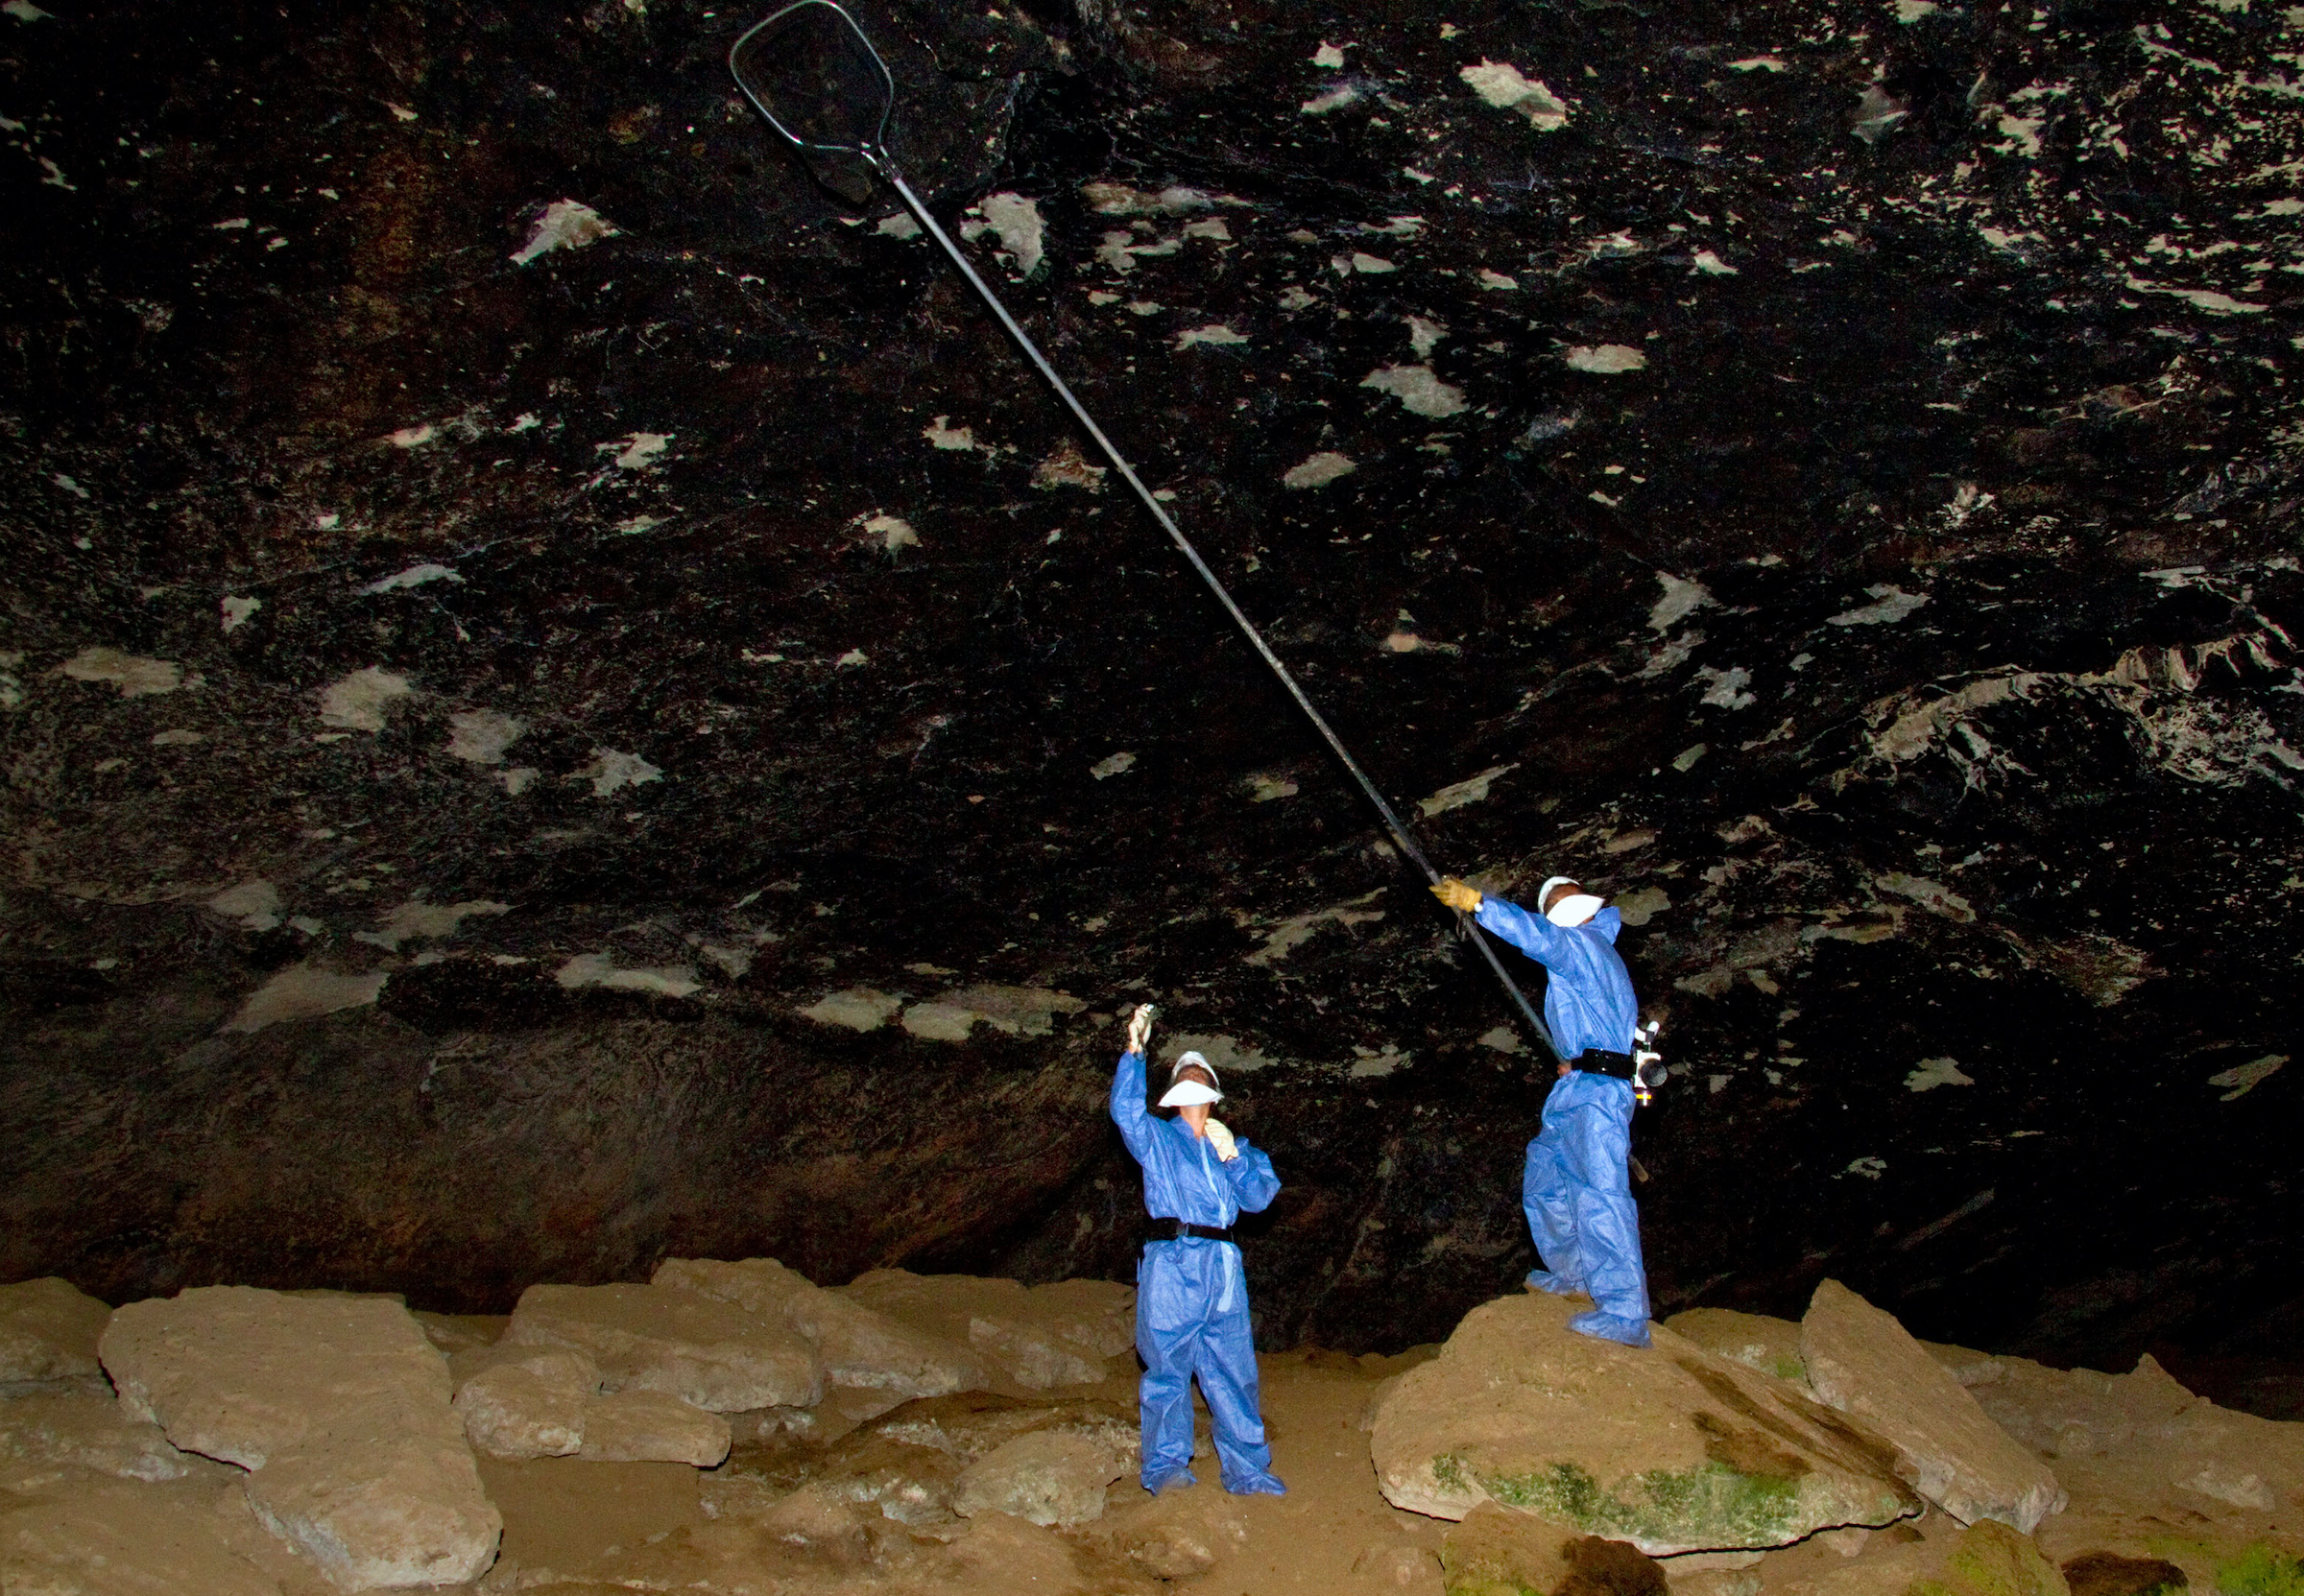 <p>Scientists collect bats in a cave, surveilling for emerging zoonotic diseases. (Image: Alamy)</p>